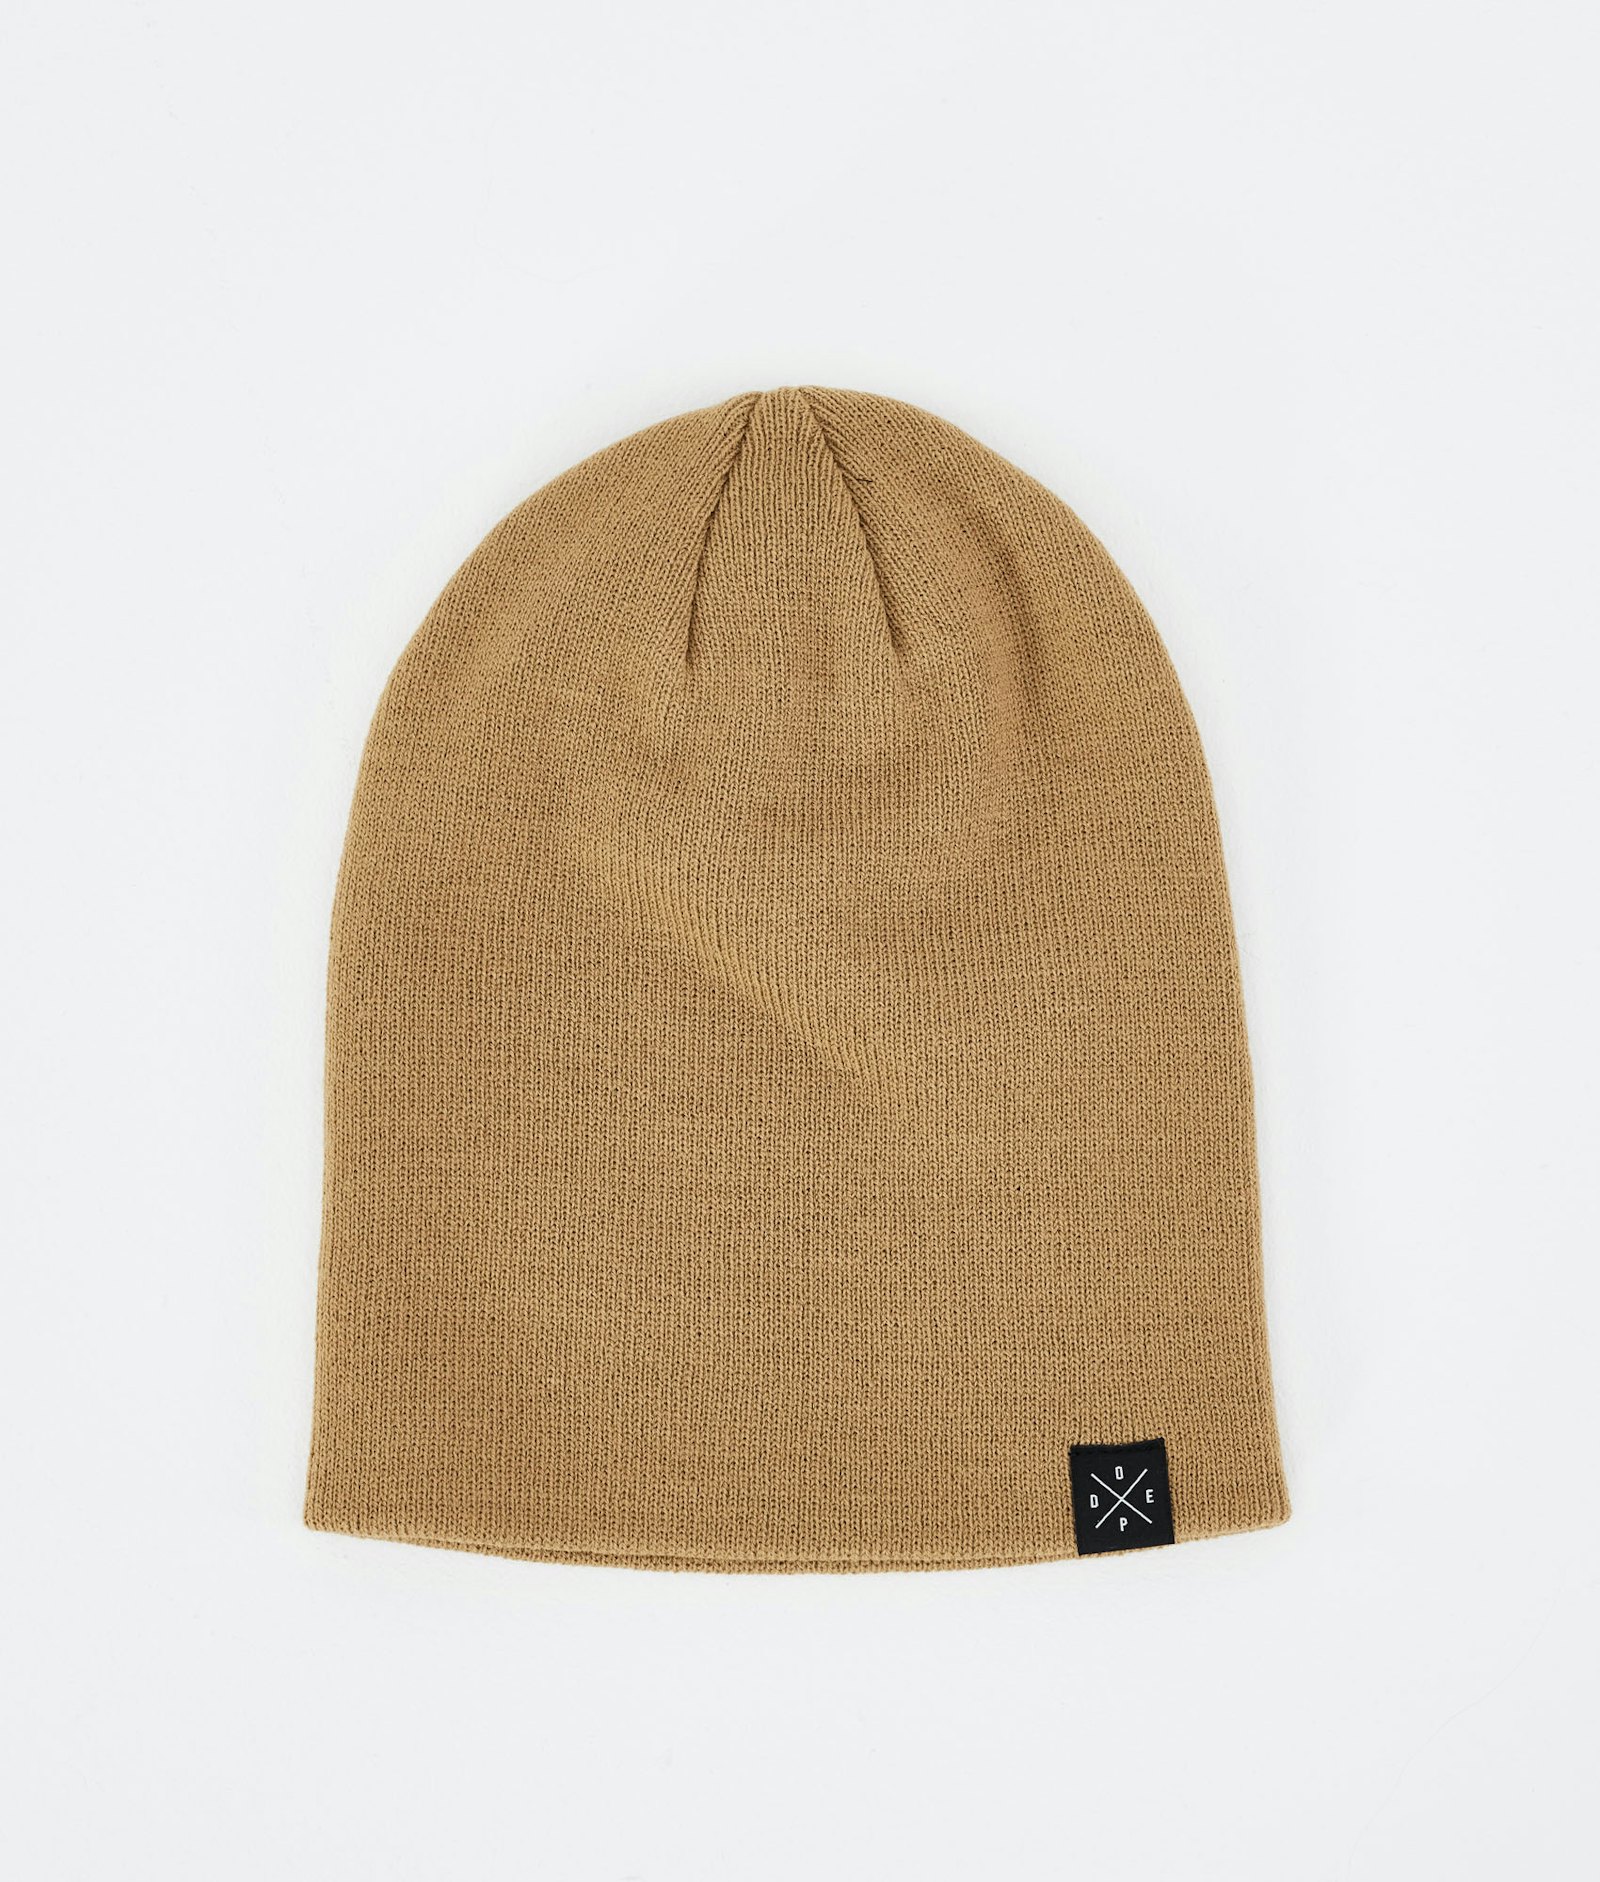 Solitude 2021 Beanie Gold, Image 2 of 4